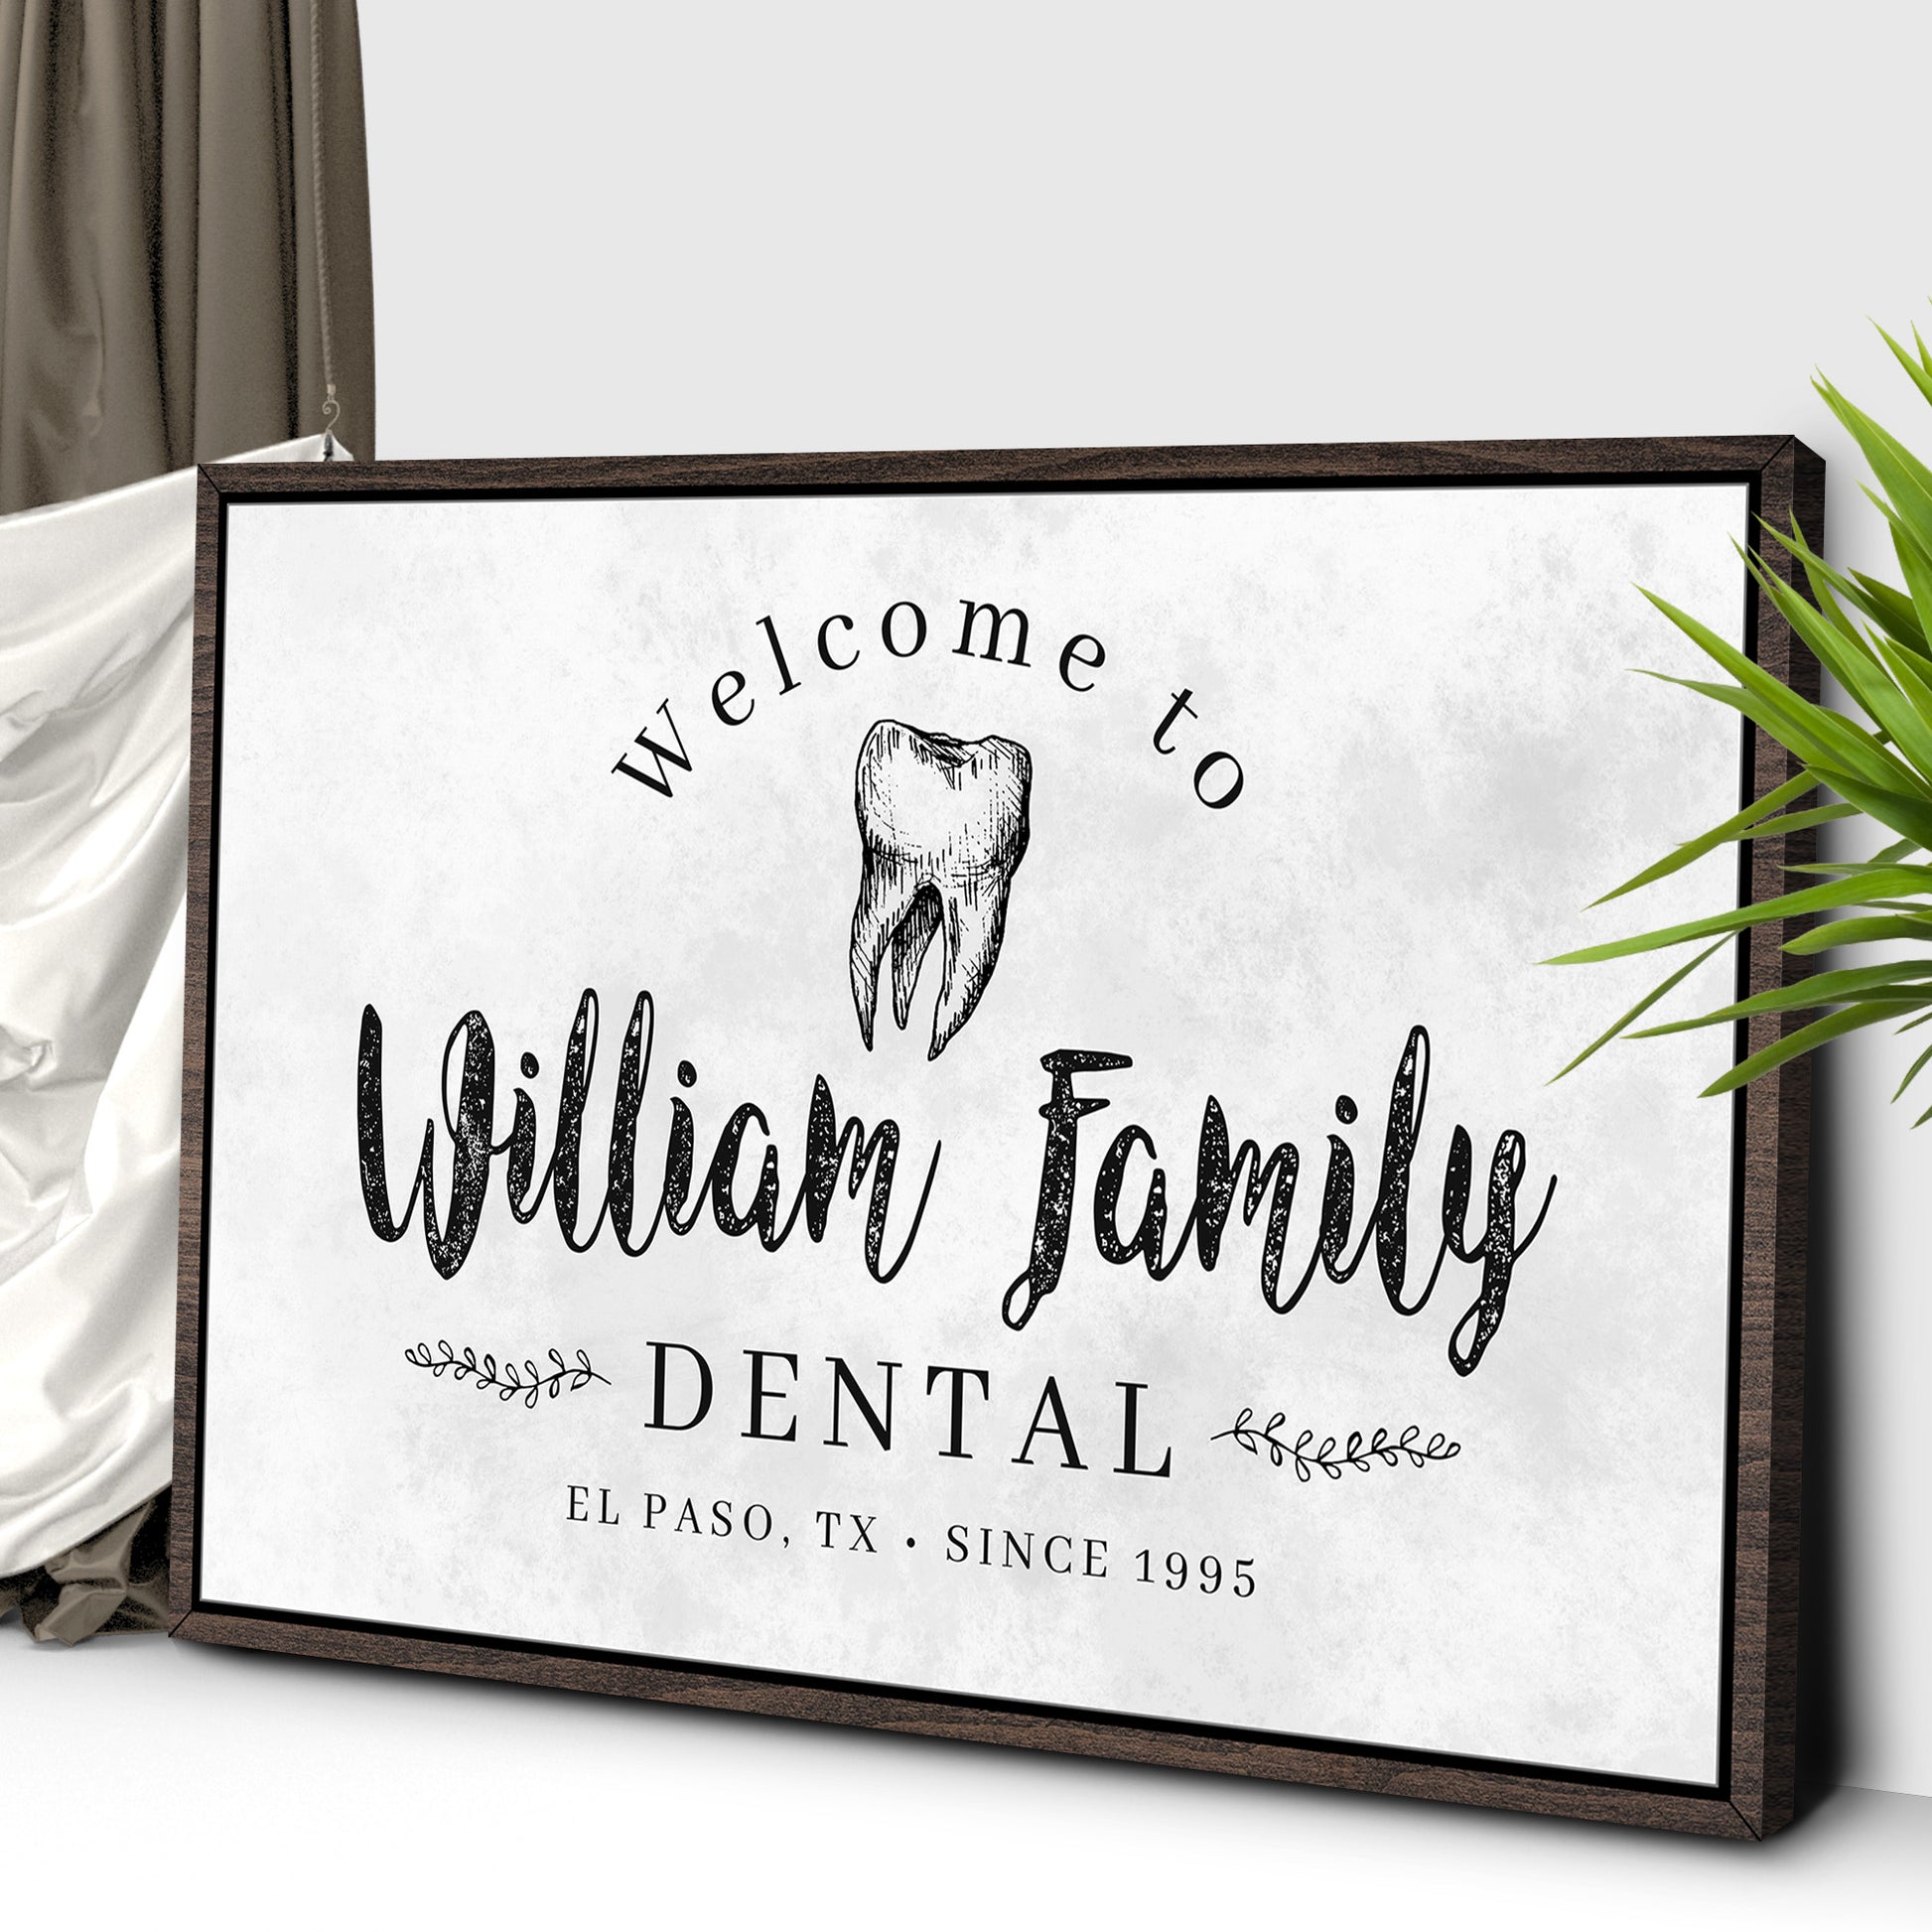 Dentist Sign X - Image by Tailored Canvases